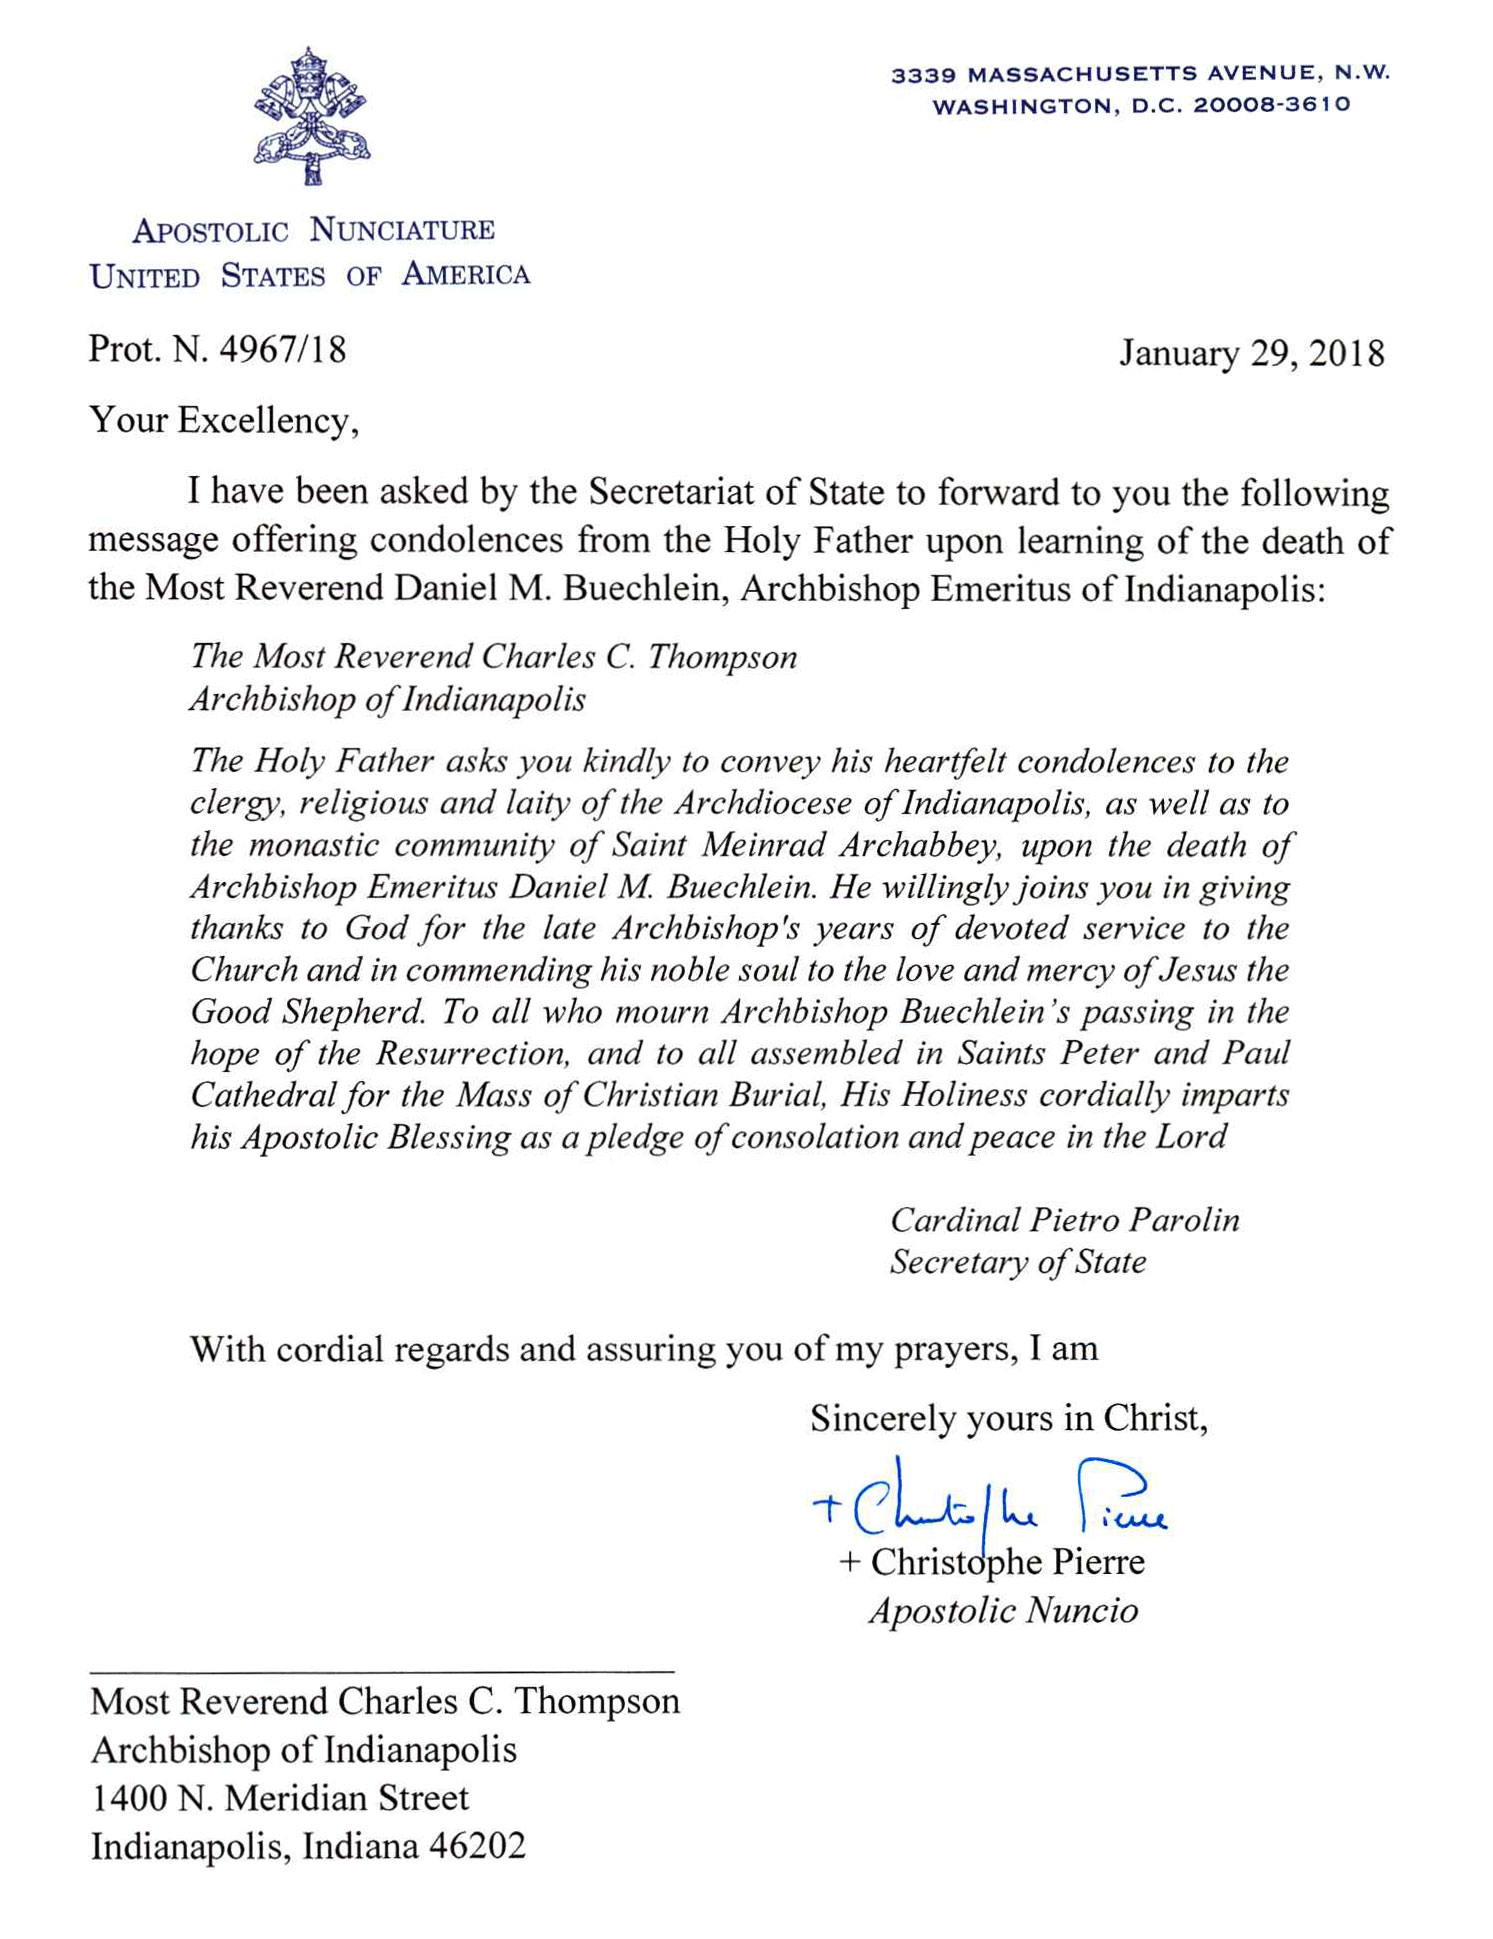 letter-of-condolence-from-pope-francis-february-2-2018